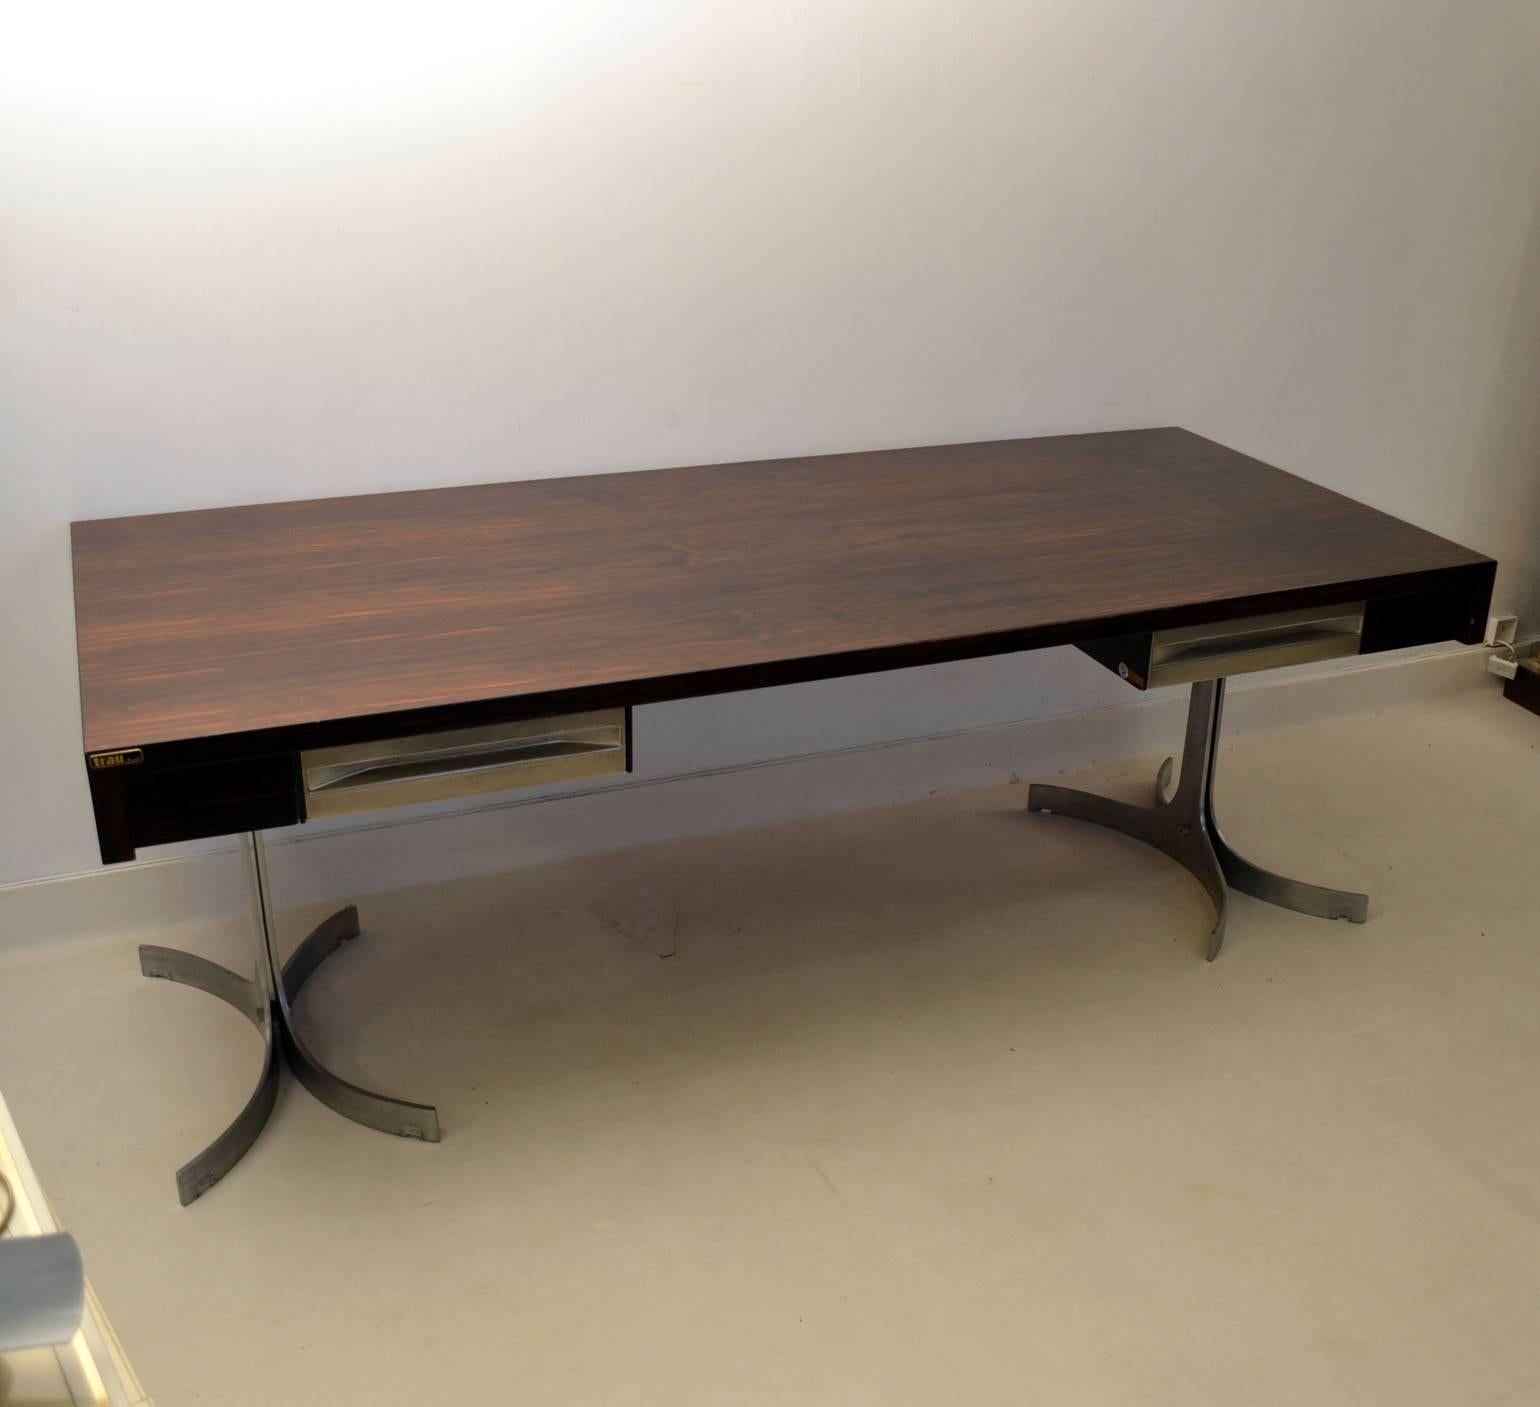 Large executive rectangular desk by Trau, Turin, Italy, 1960s, veneered in Indian palisander. On both sides of the desk is equipped with two large  drawers incorporating the hand pull. The large table top is supported by two curved brushed aluminum